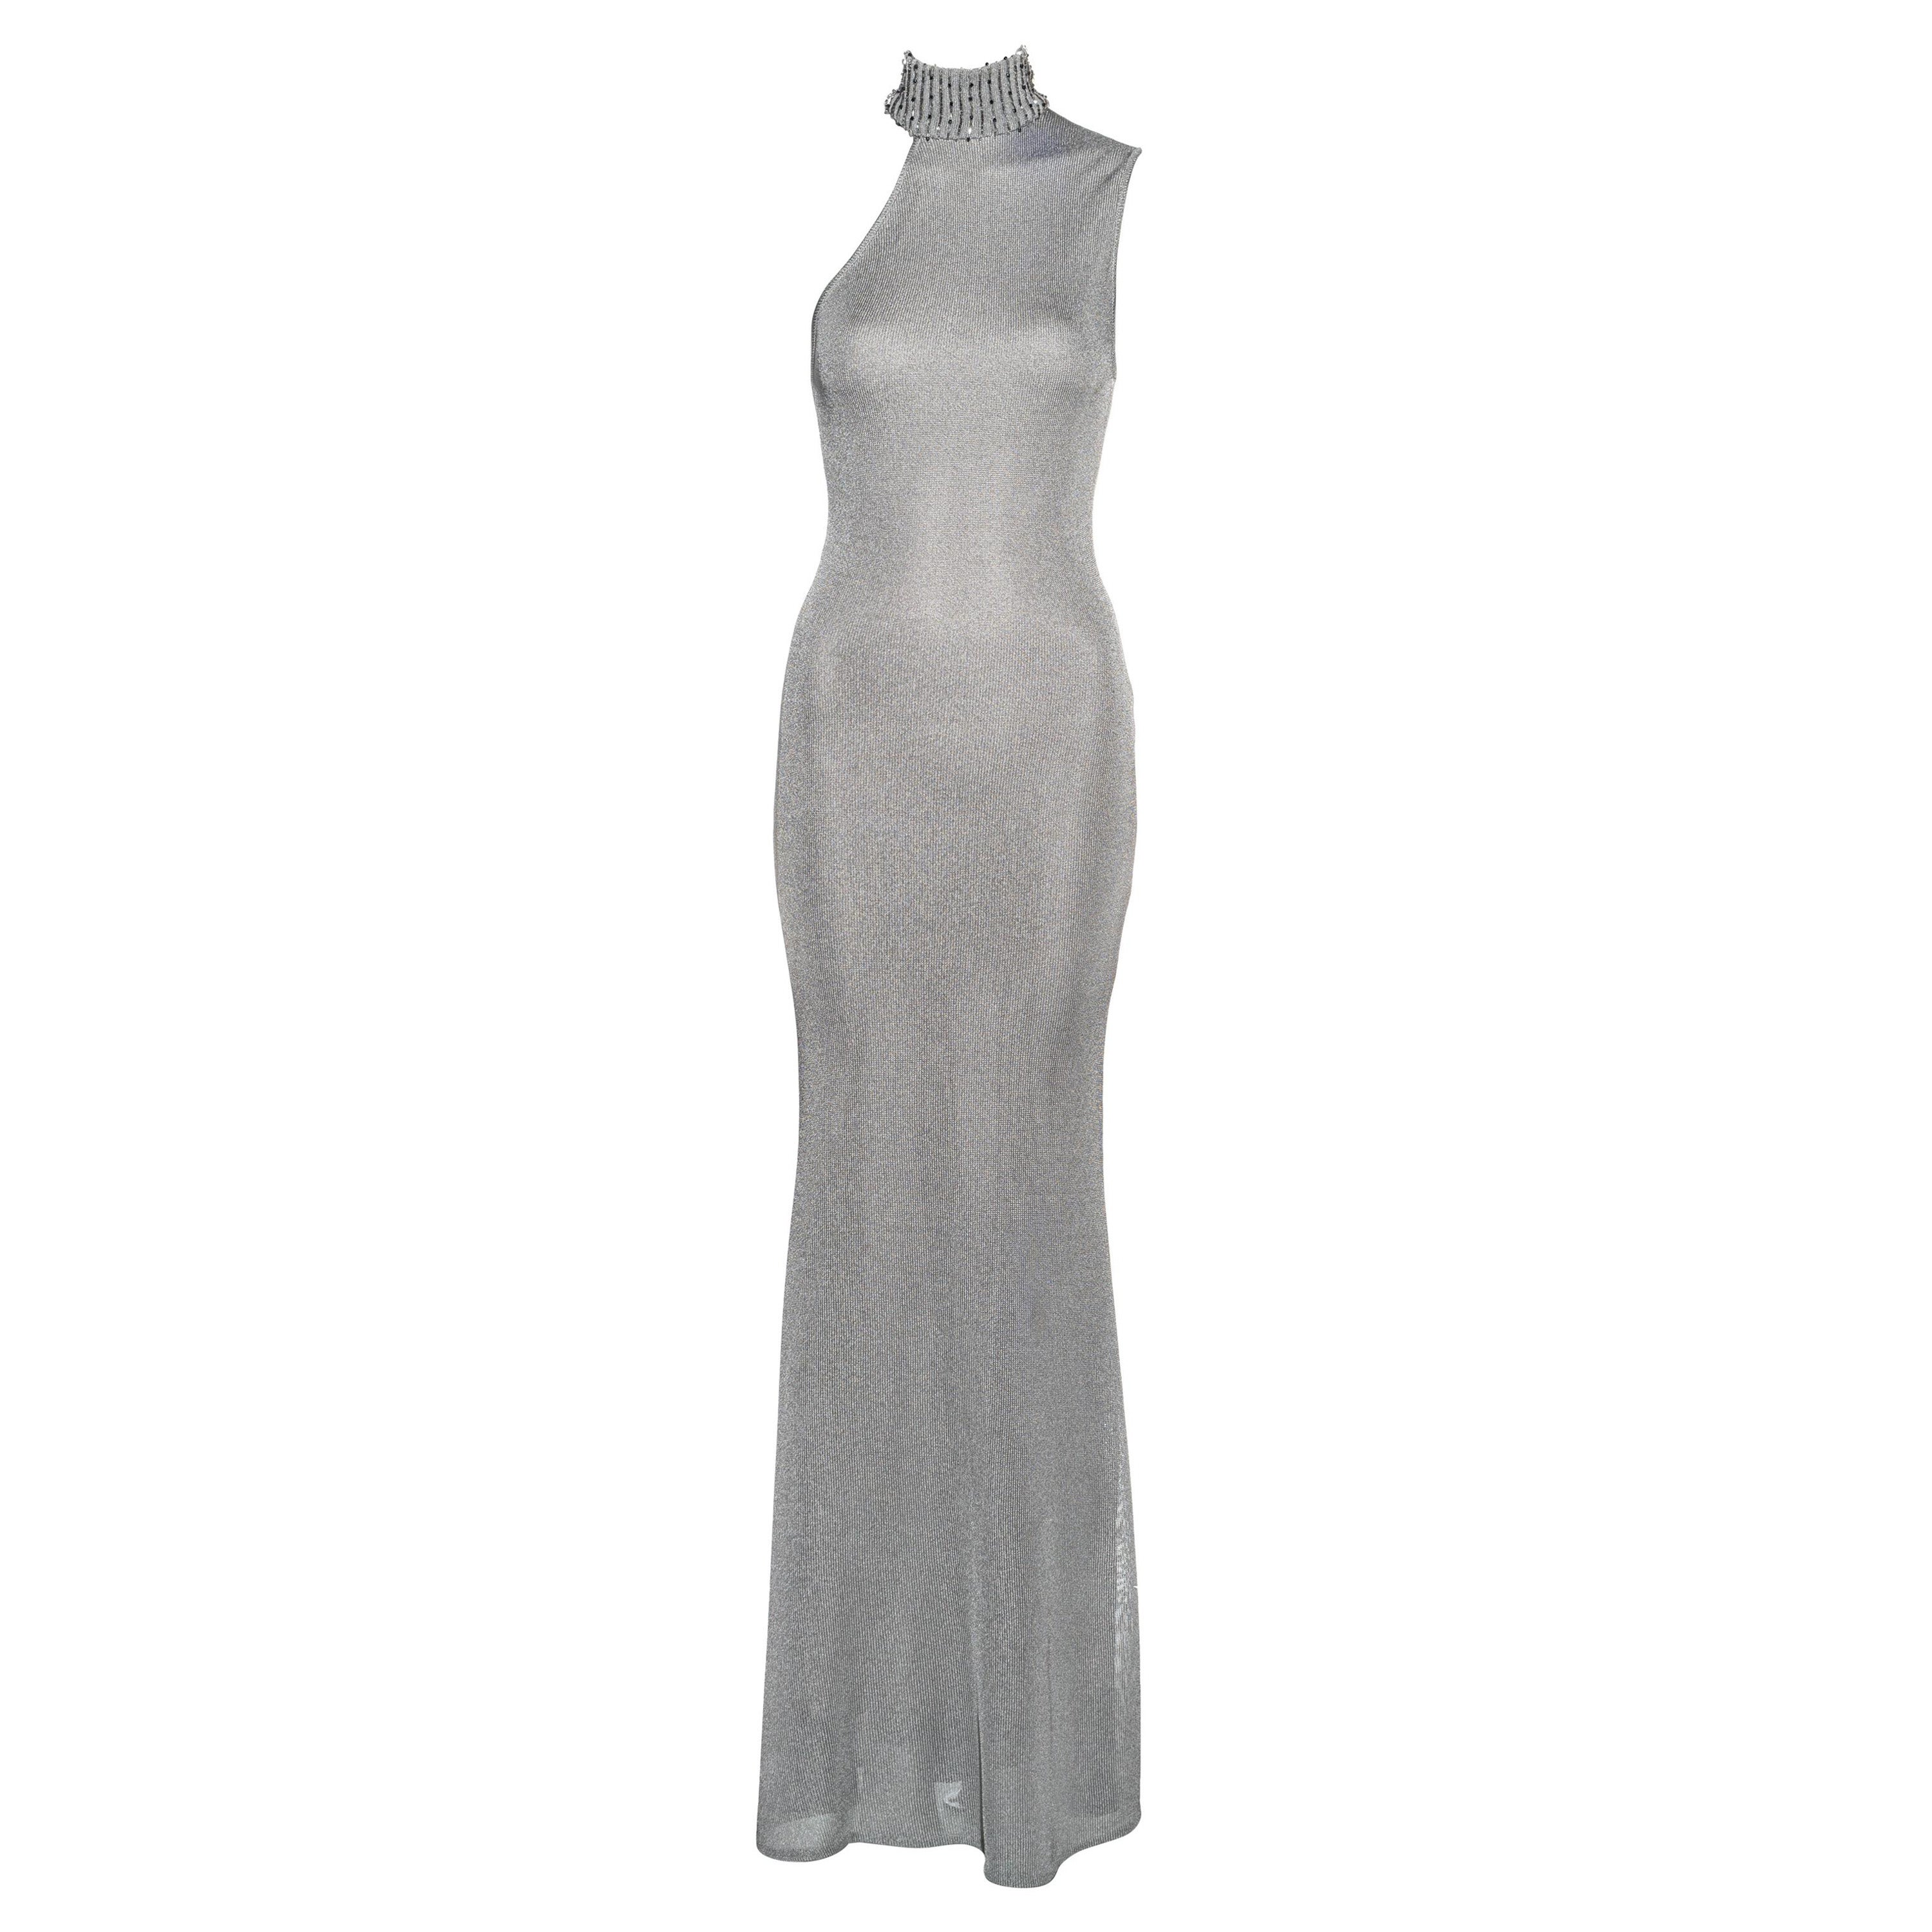 Gianni Versace silver knitted rayon evening dress, fw 1996 For Sale